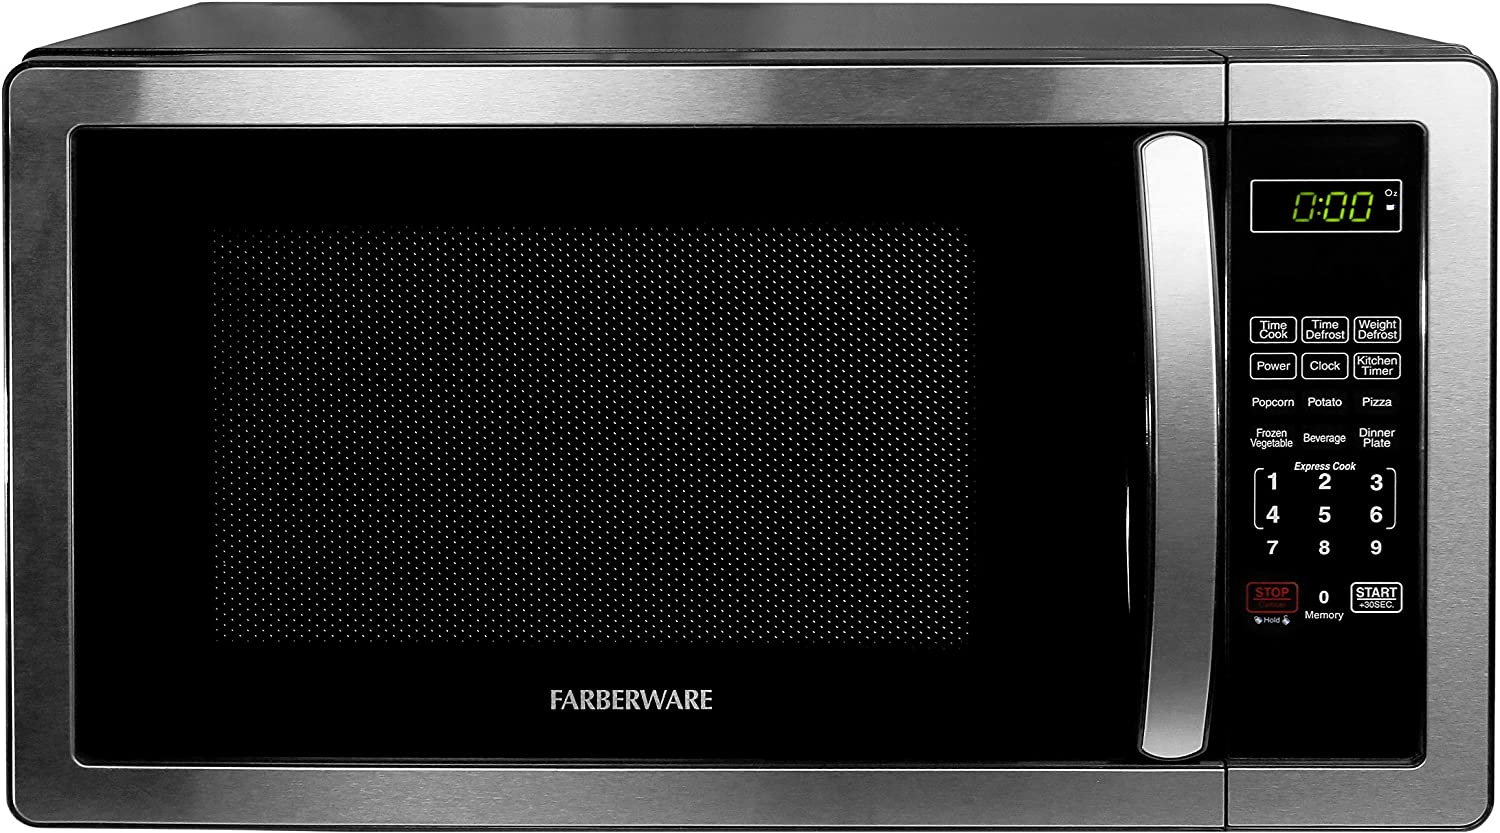 https://discounttoday.net/wp-content/uploads/2022/09/Farberware-FMO11AHTBKB-Countertop-Microwave-1.1-Cu.-Ft.-1000-Watt-Compact-Microwave-Oven-with-LED-lighting-Child-lock-and-Easy-Clean-Interior-Stainless-Steel-Interior-Exterior9.jpg